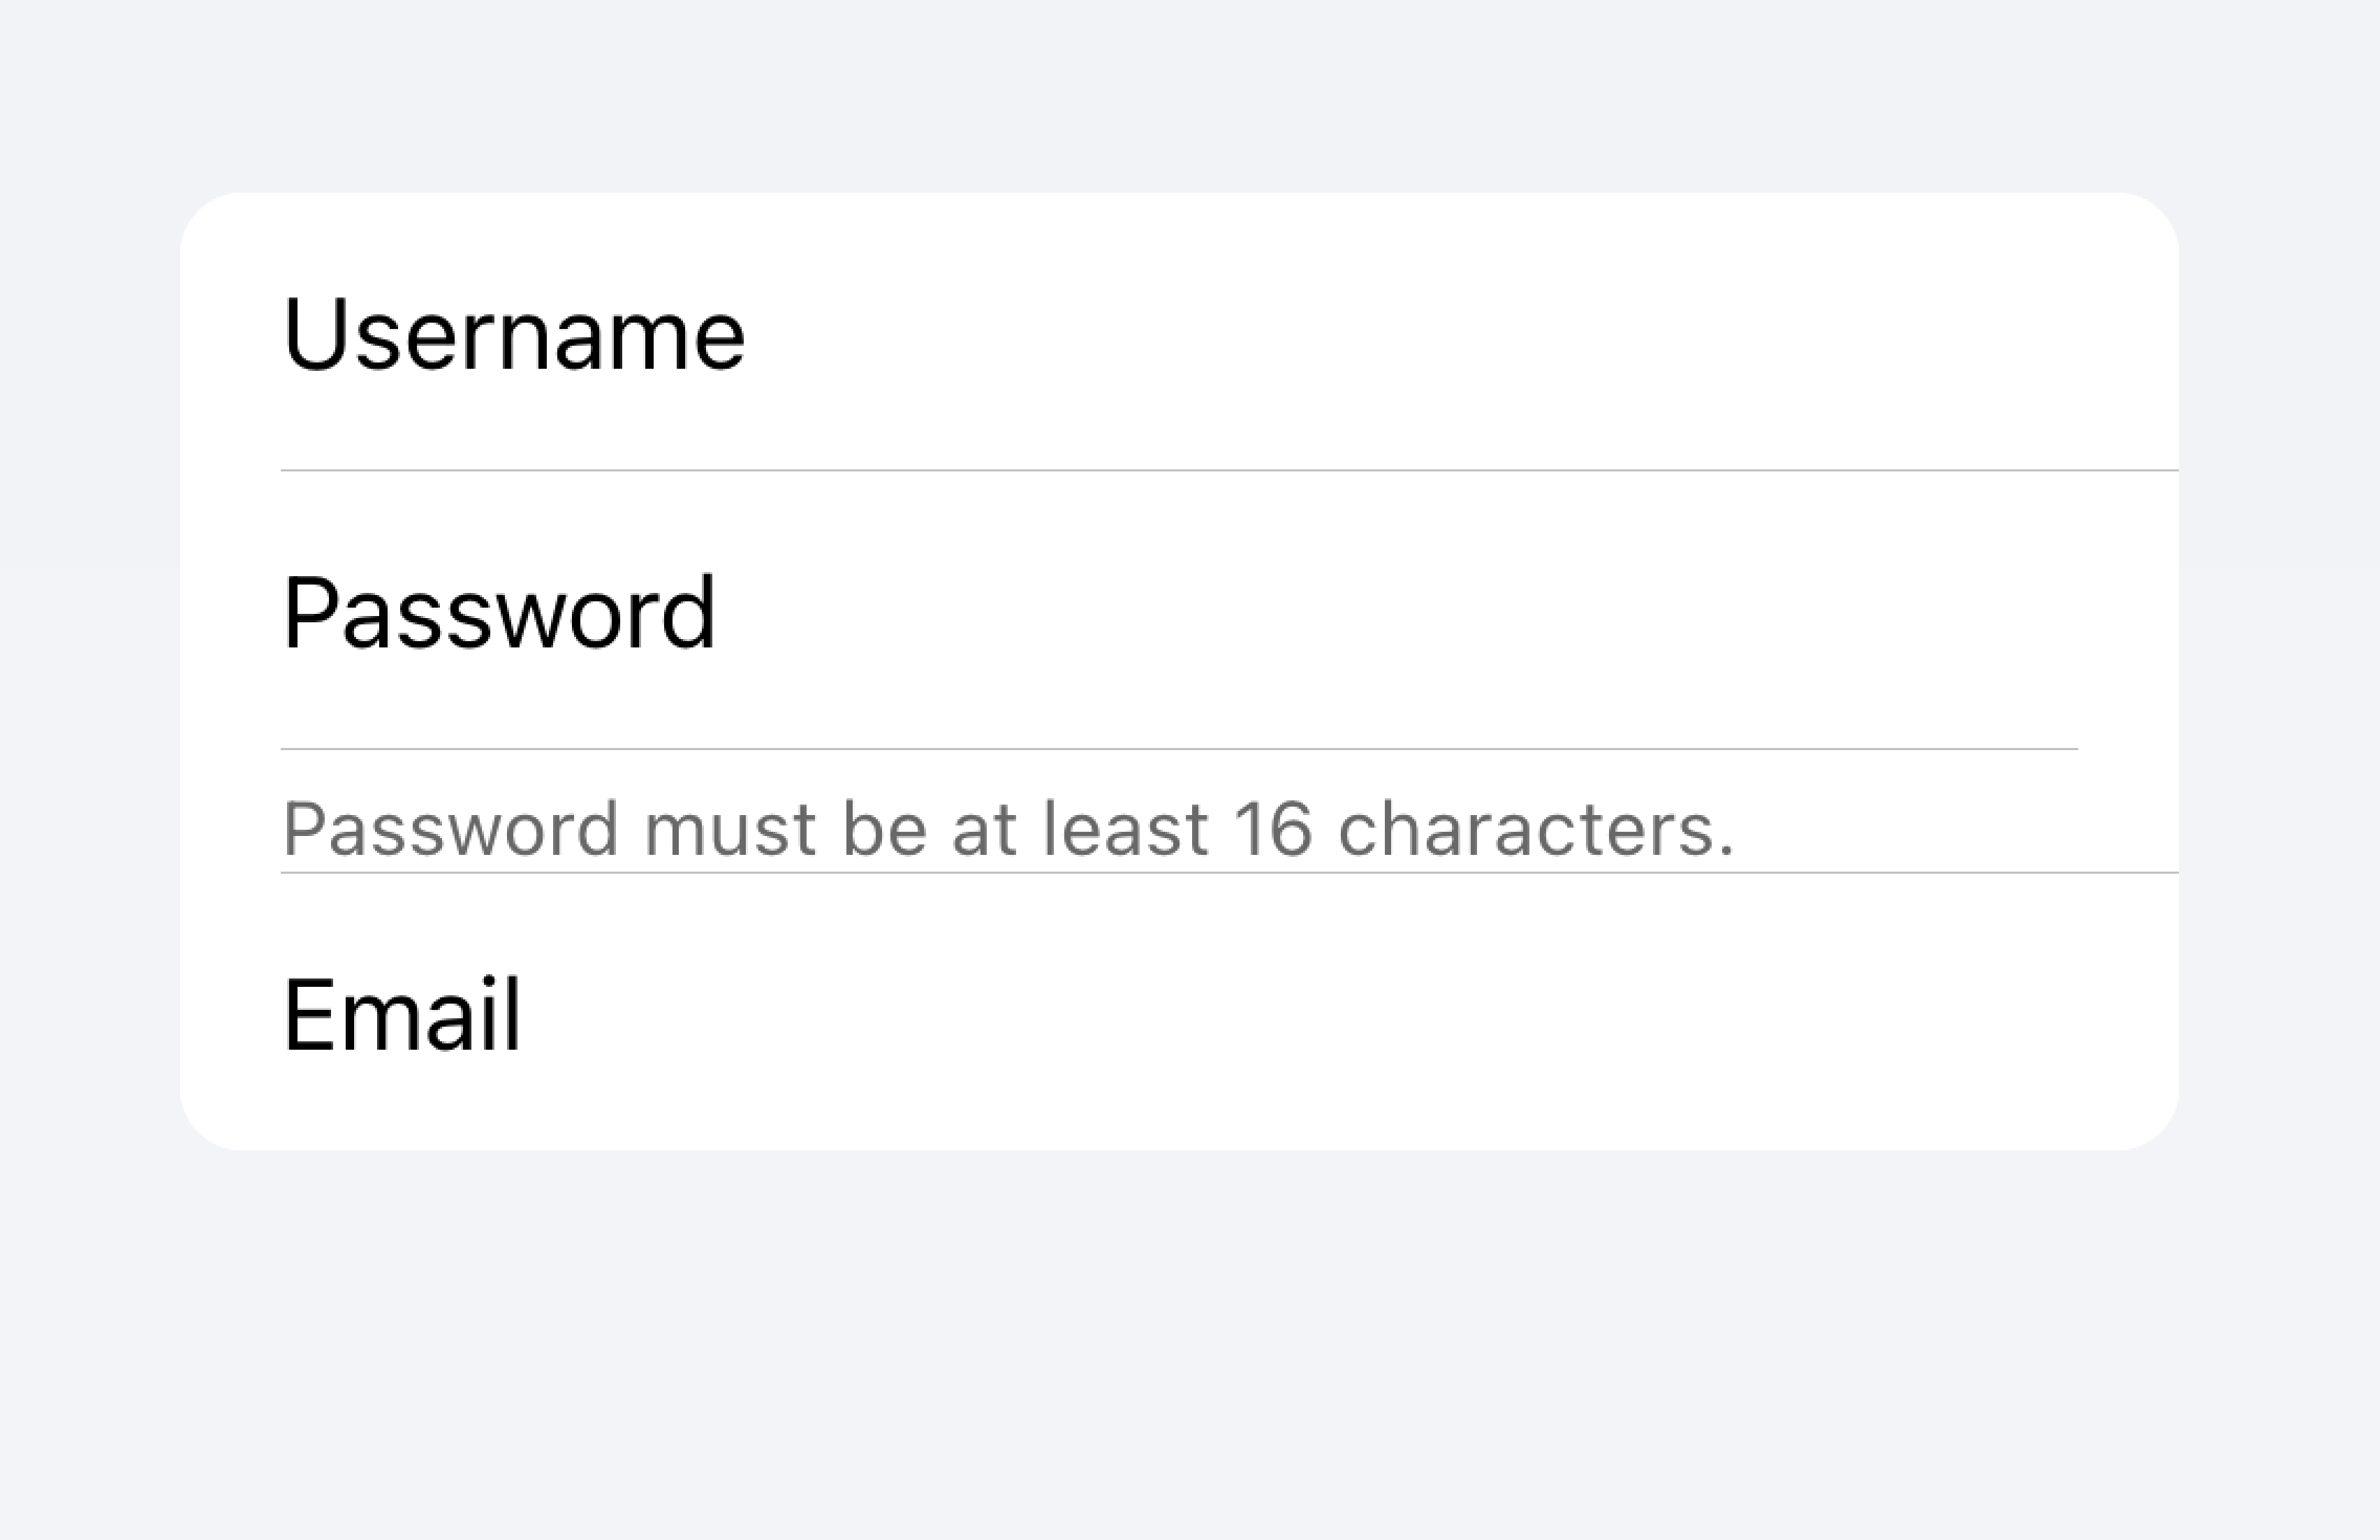 There is one list of inputs. One of the inputs is a password input with text below the input that says 'Password must be at least 16 characters'. However, this text is placed directly above another input, so it's not immediately clear which input the text is associated with.